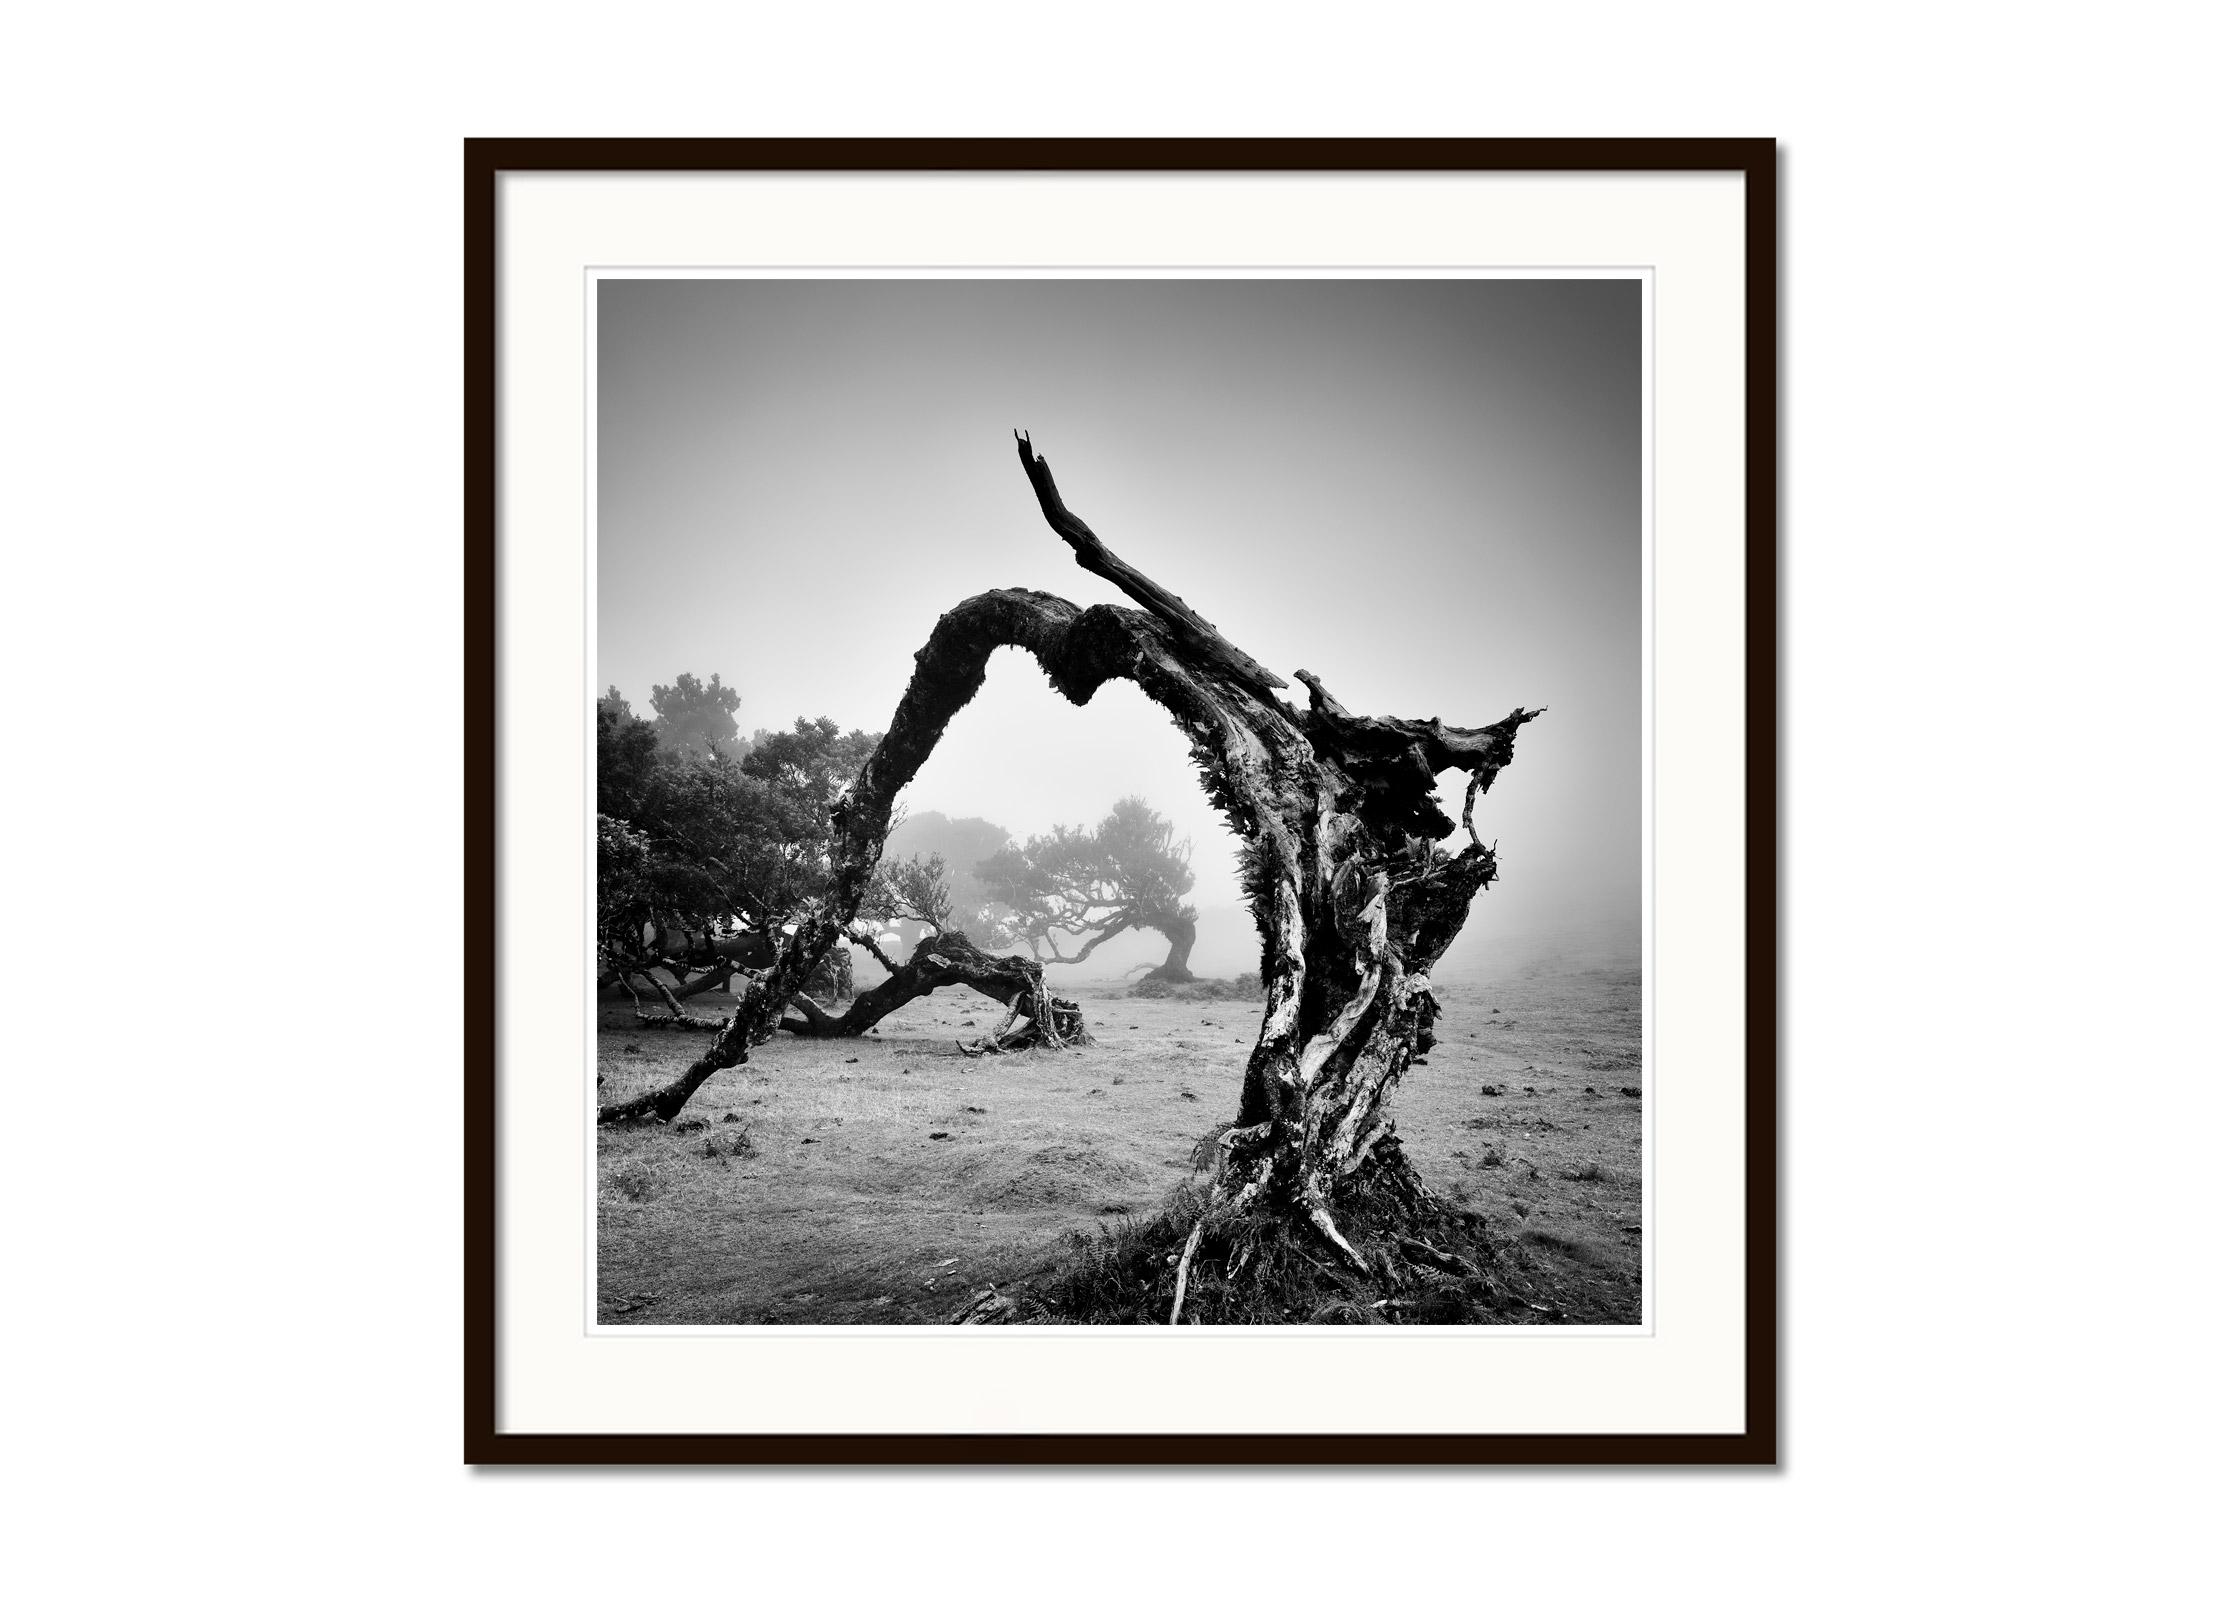 Black and white fine art landscape photography. Old angled trees in foggy morning light on the beautiful island of Madeira, Portugal. Archival pigment ink print as part of a limited edition of 7. All Gerald Berghammer prints are made to order in